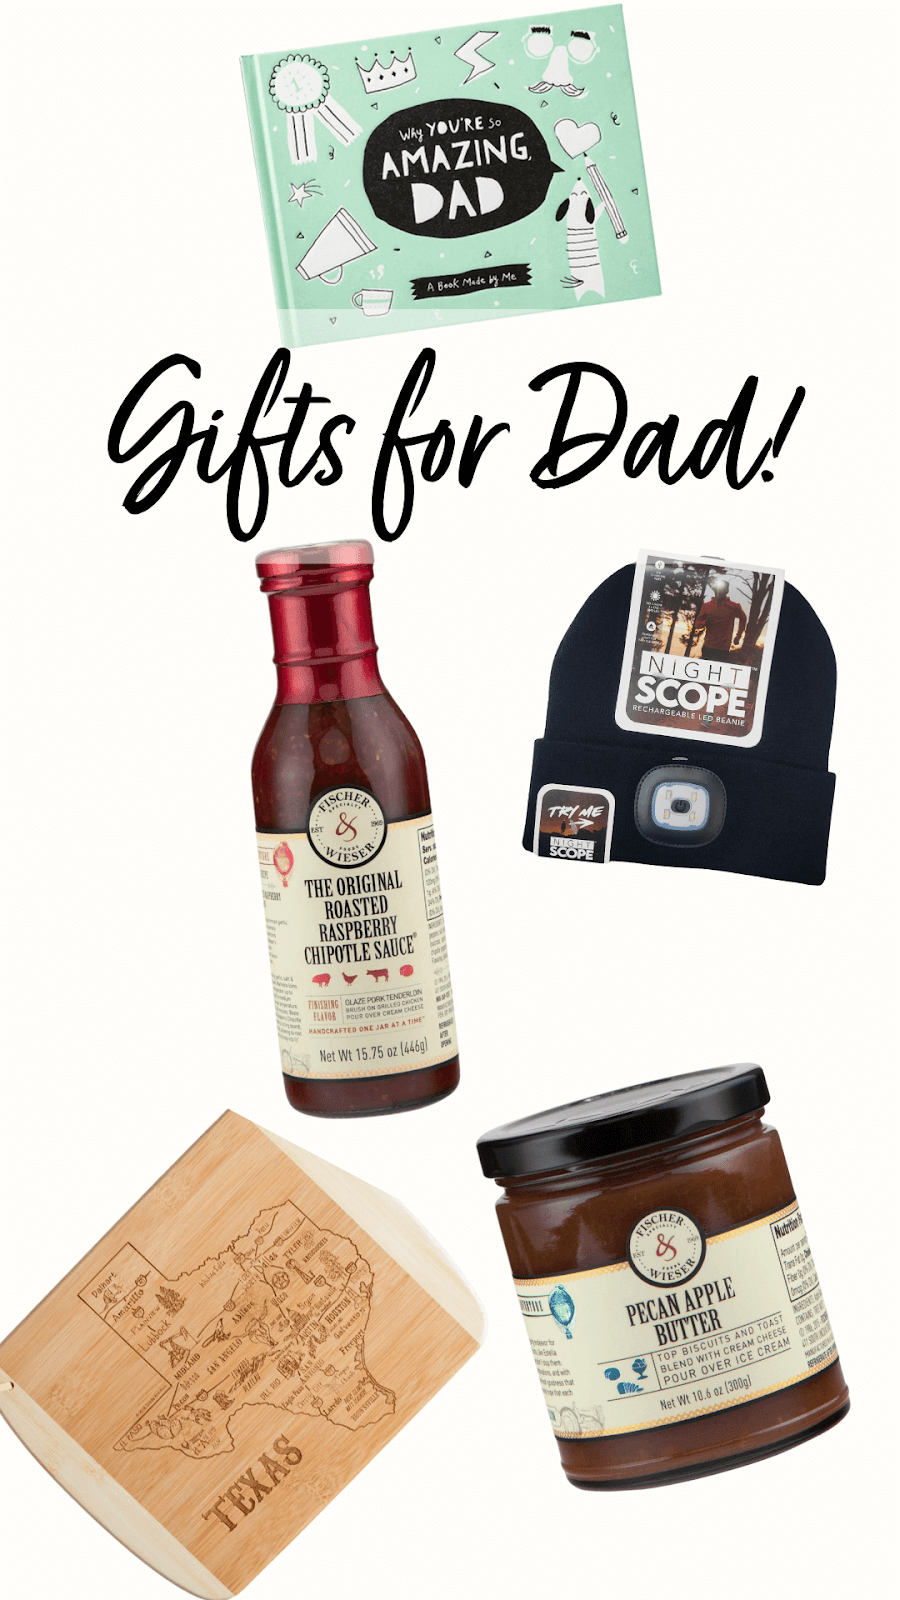 Shop Gifts for Dad